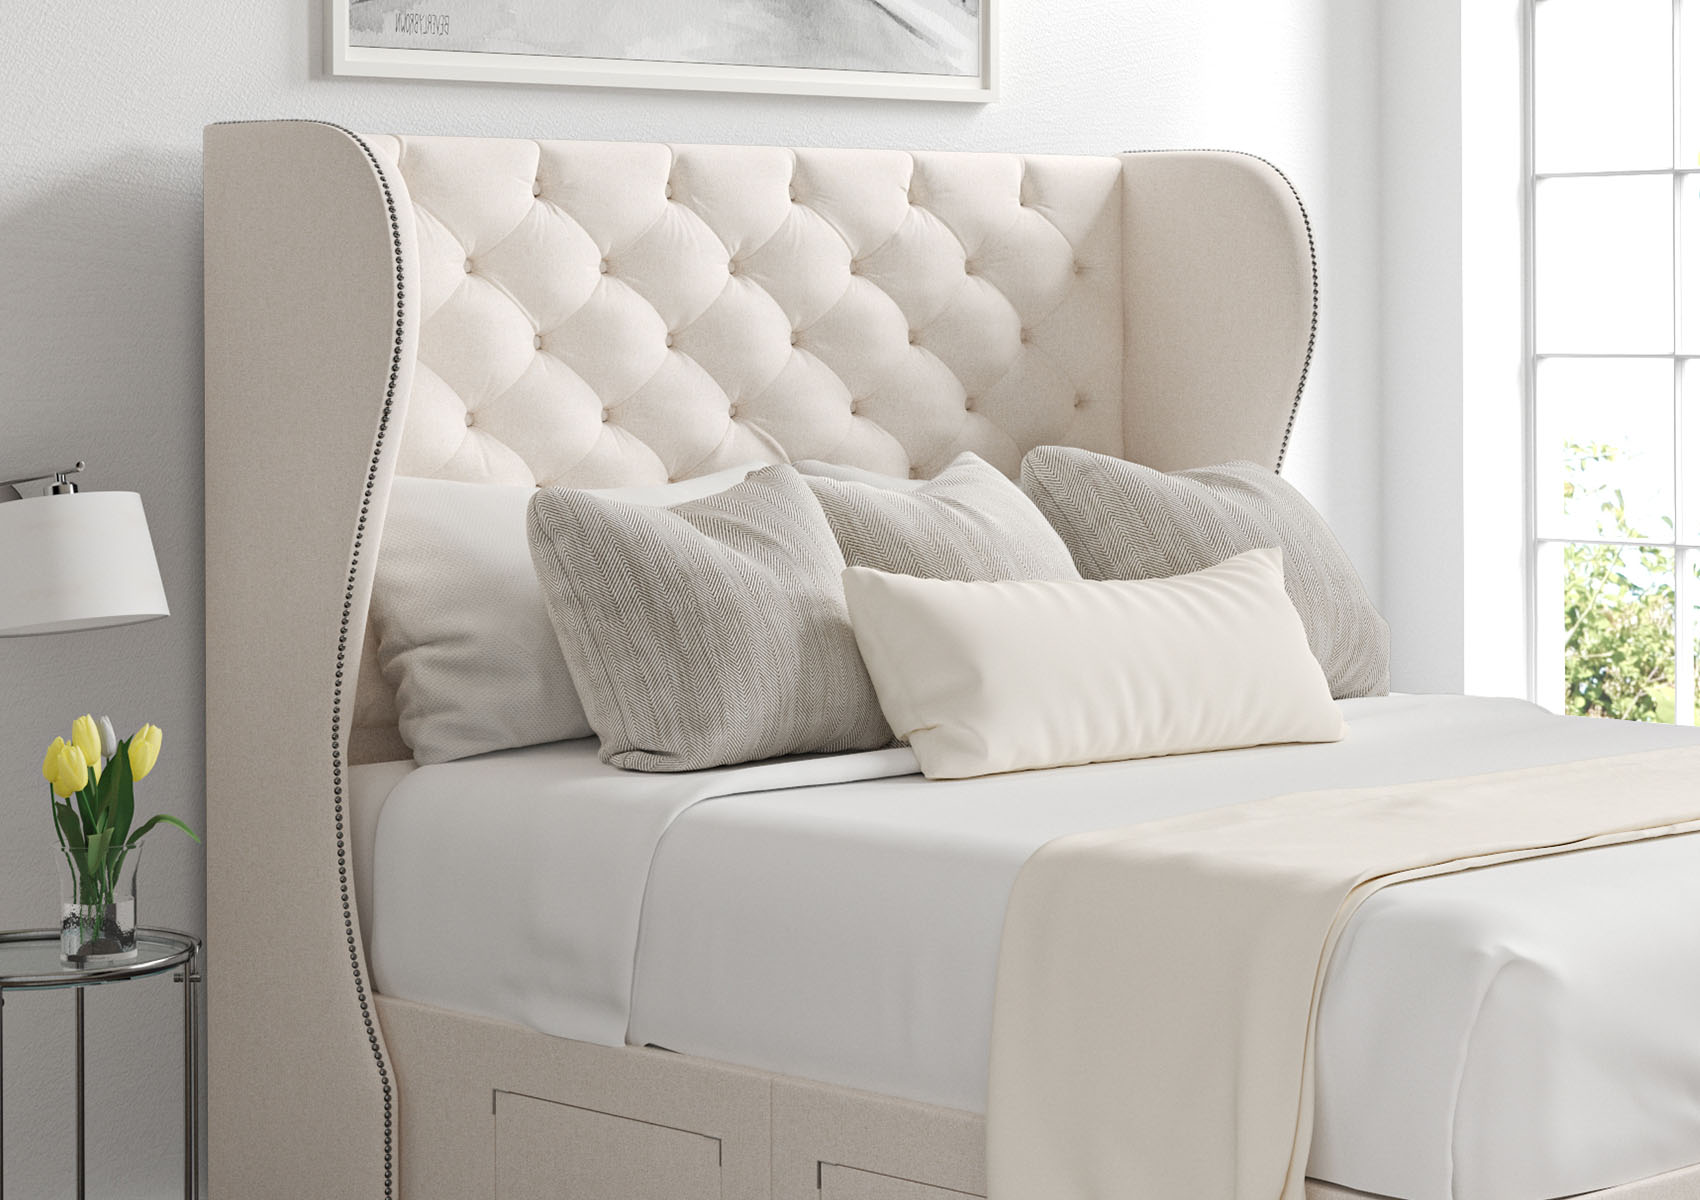 View Miami Winged Upholstered Floor Standing Headboard Only Time4Sleep information